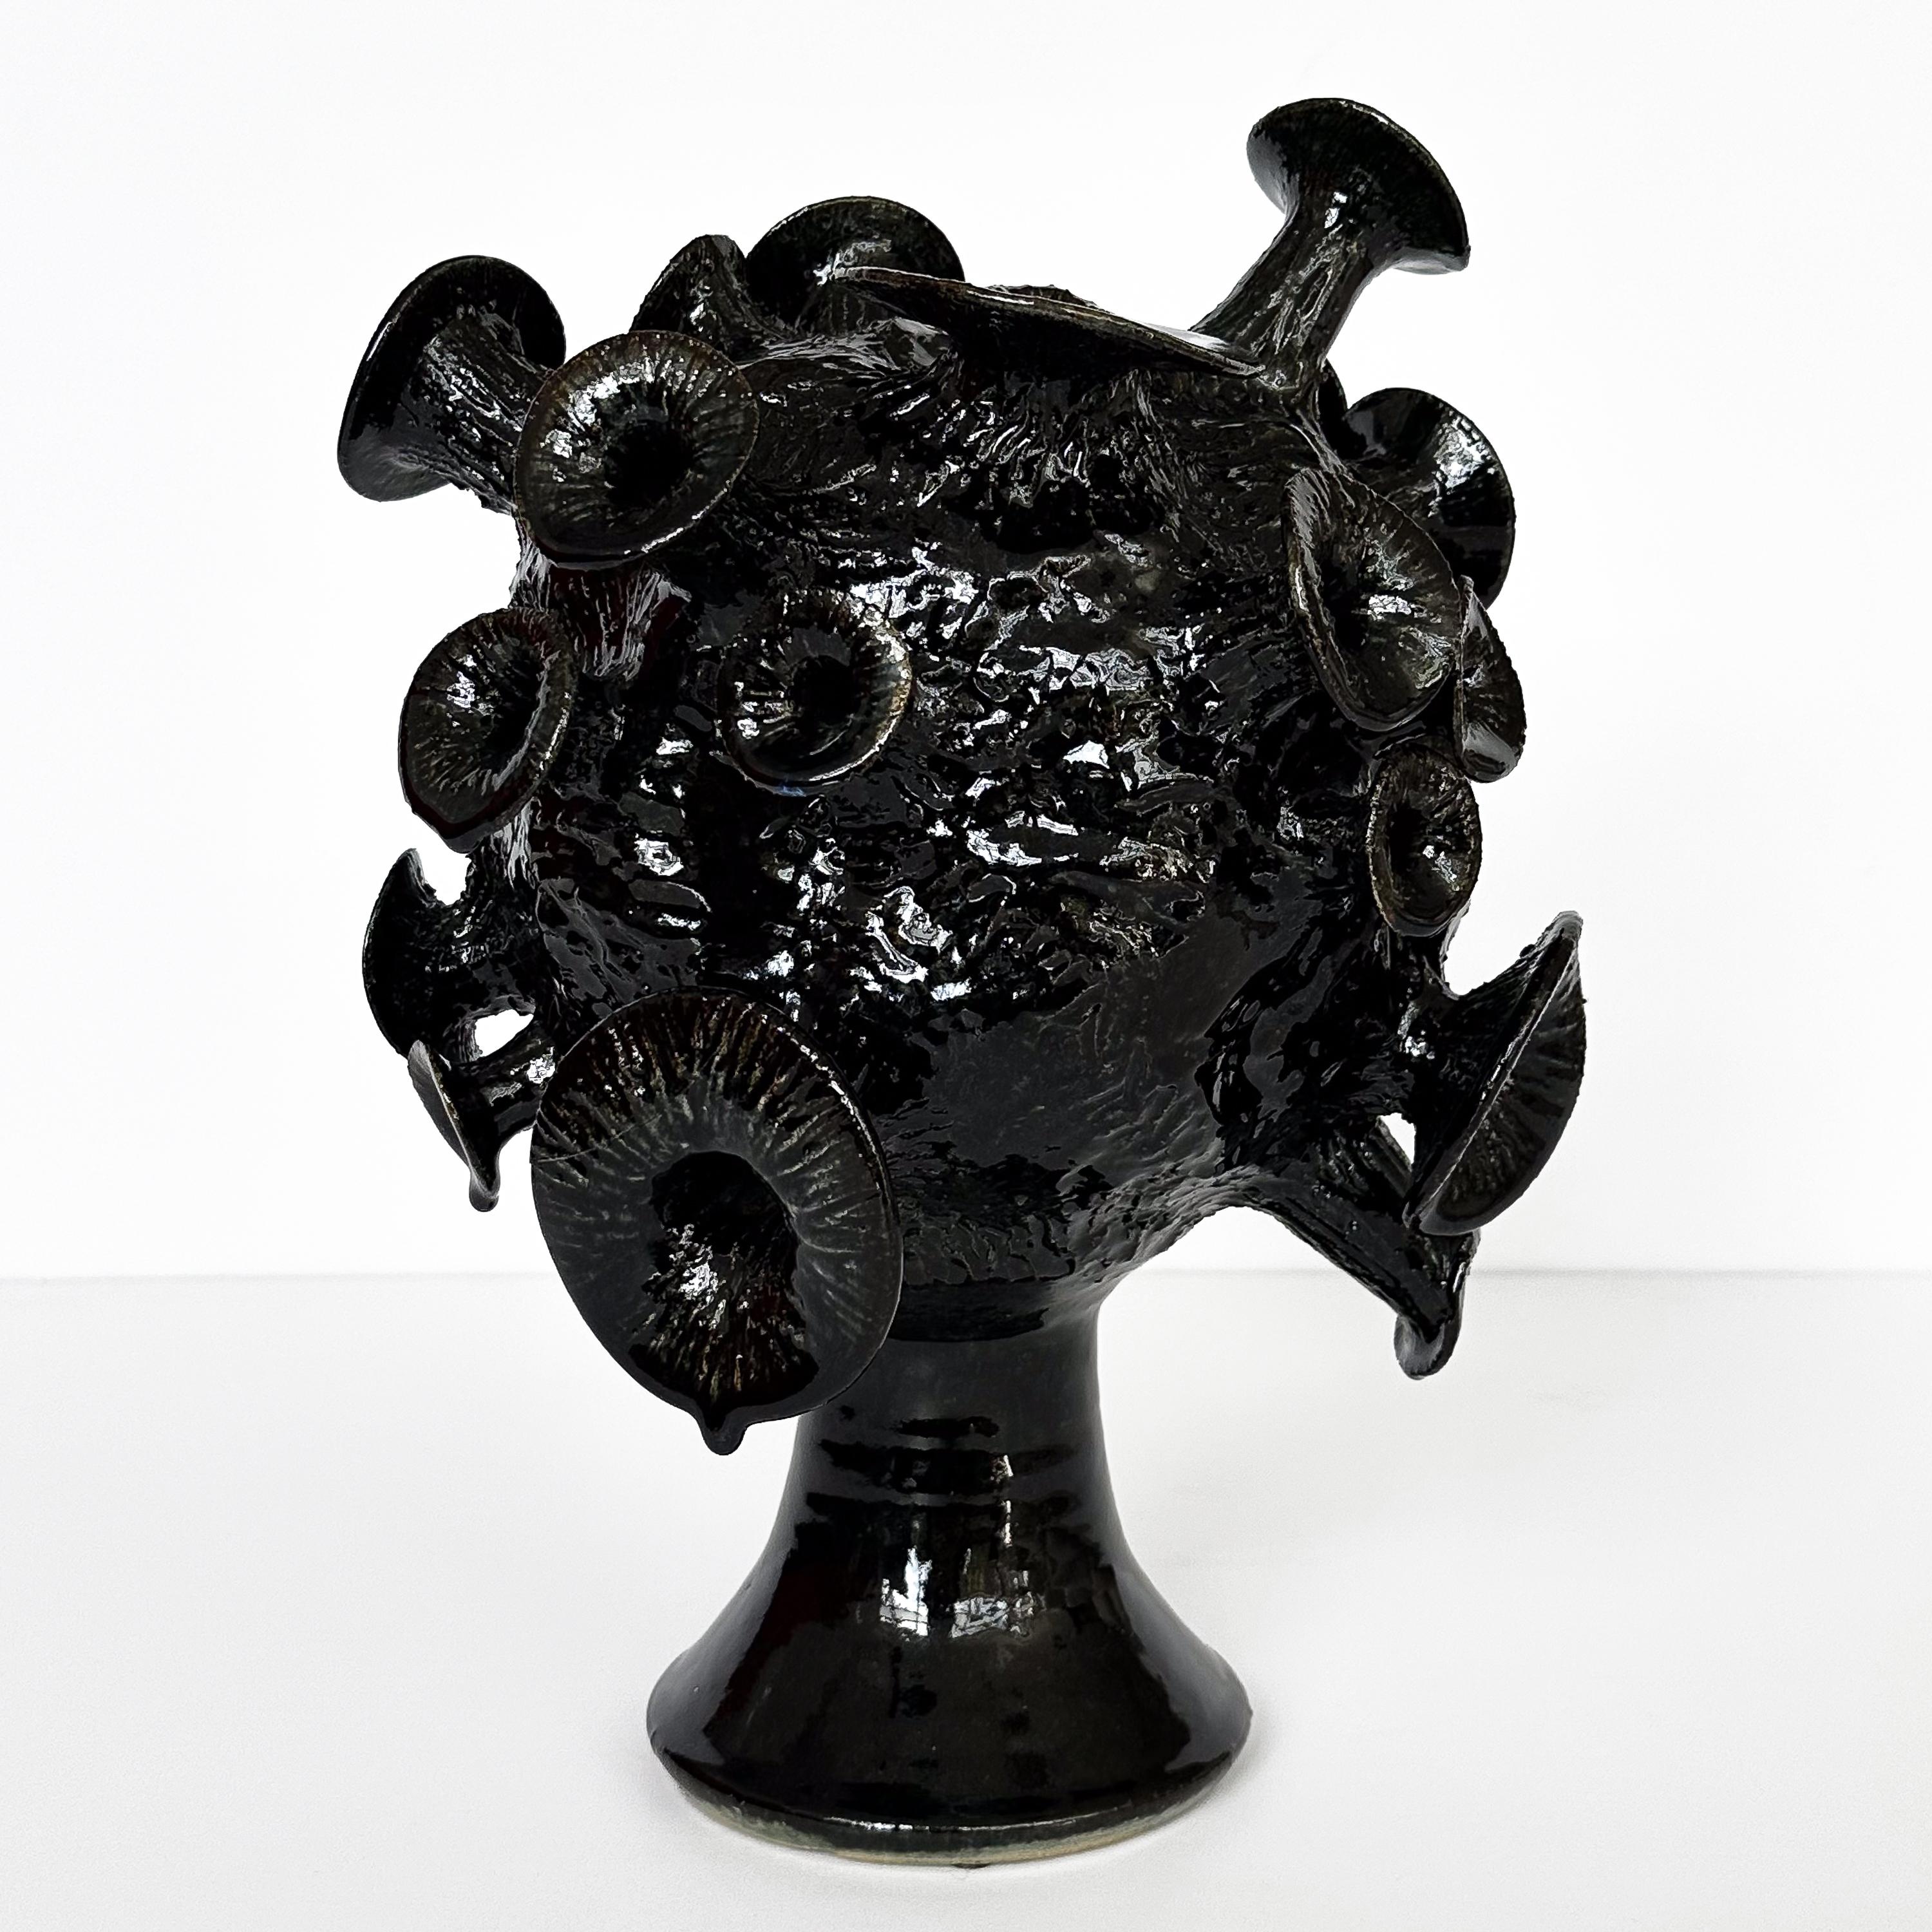 Dive deep into a realm of artistic enigma with this remarkable abstract black glazed pottery sculpture, signed 